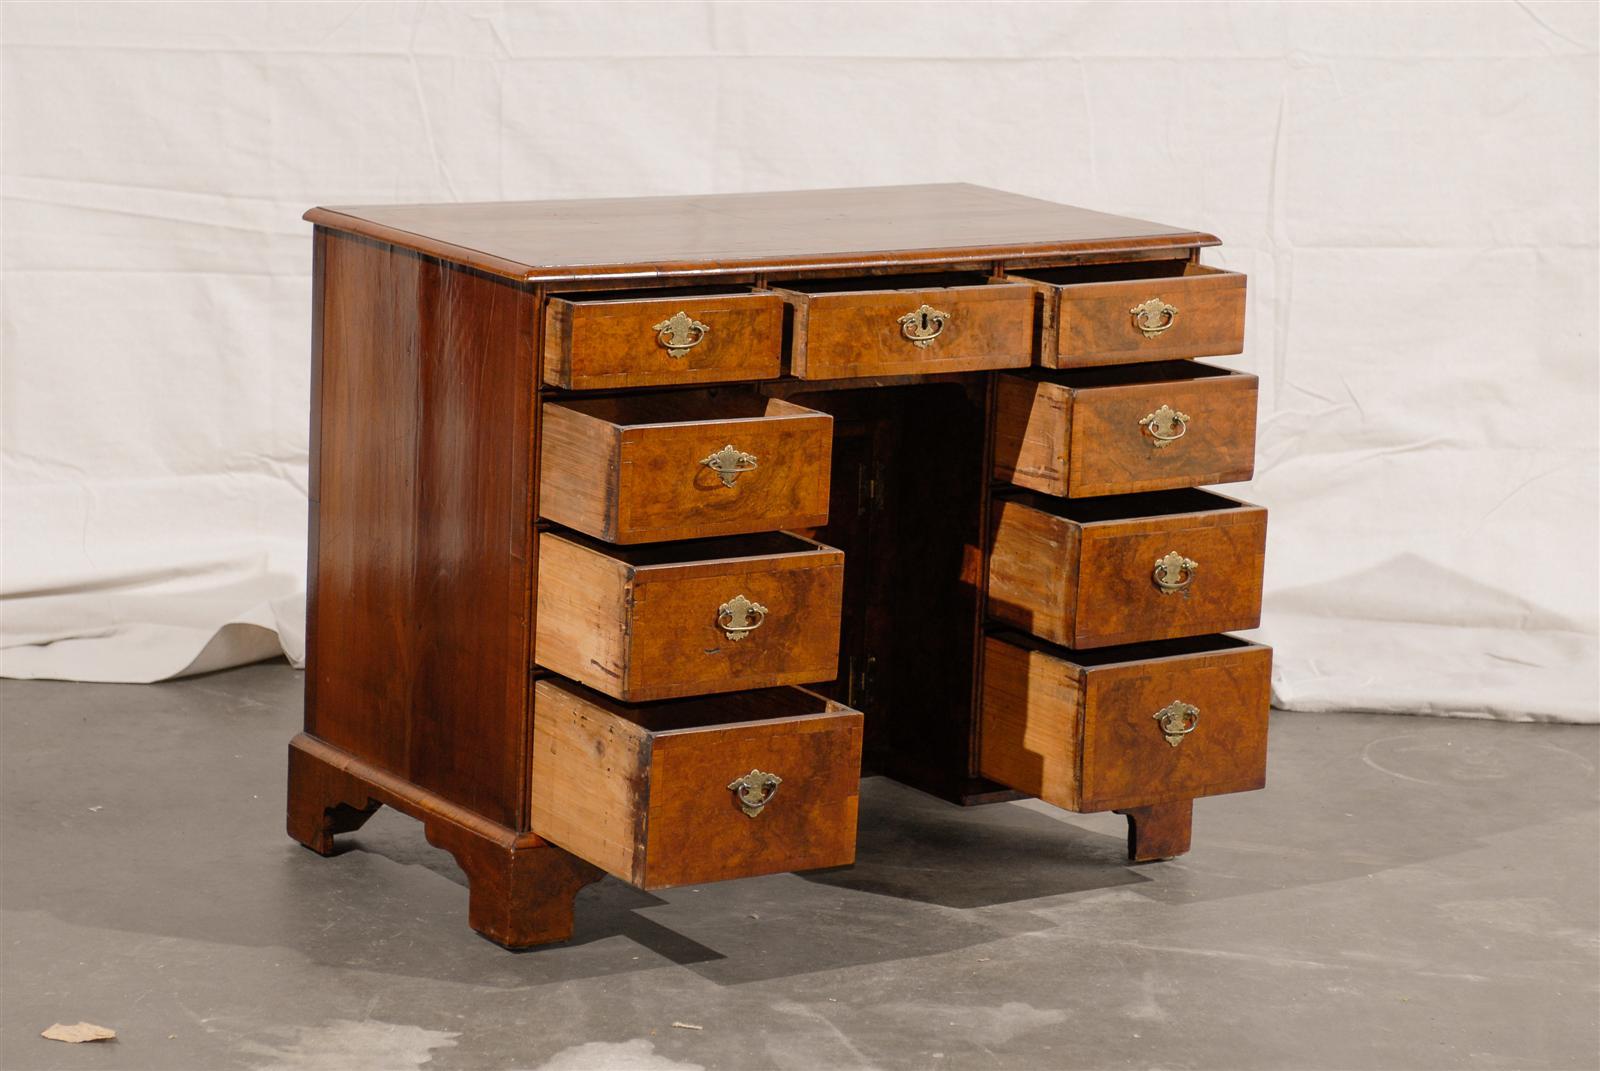 19th Century English Knee Hole Desk with Burled Walnut Top For Sale 4